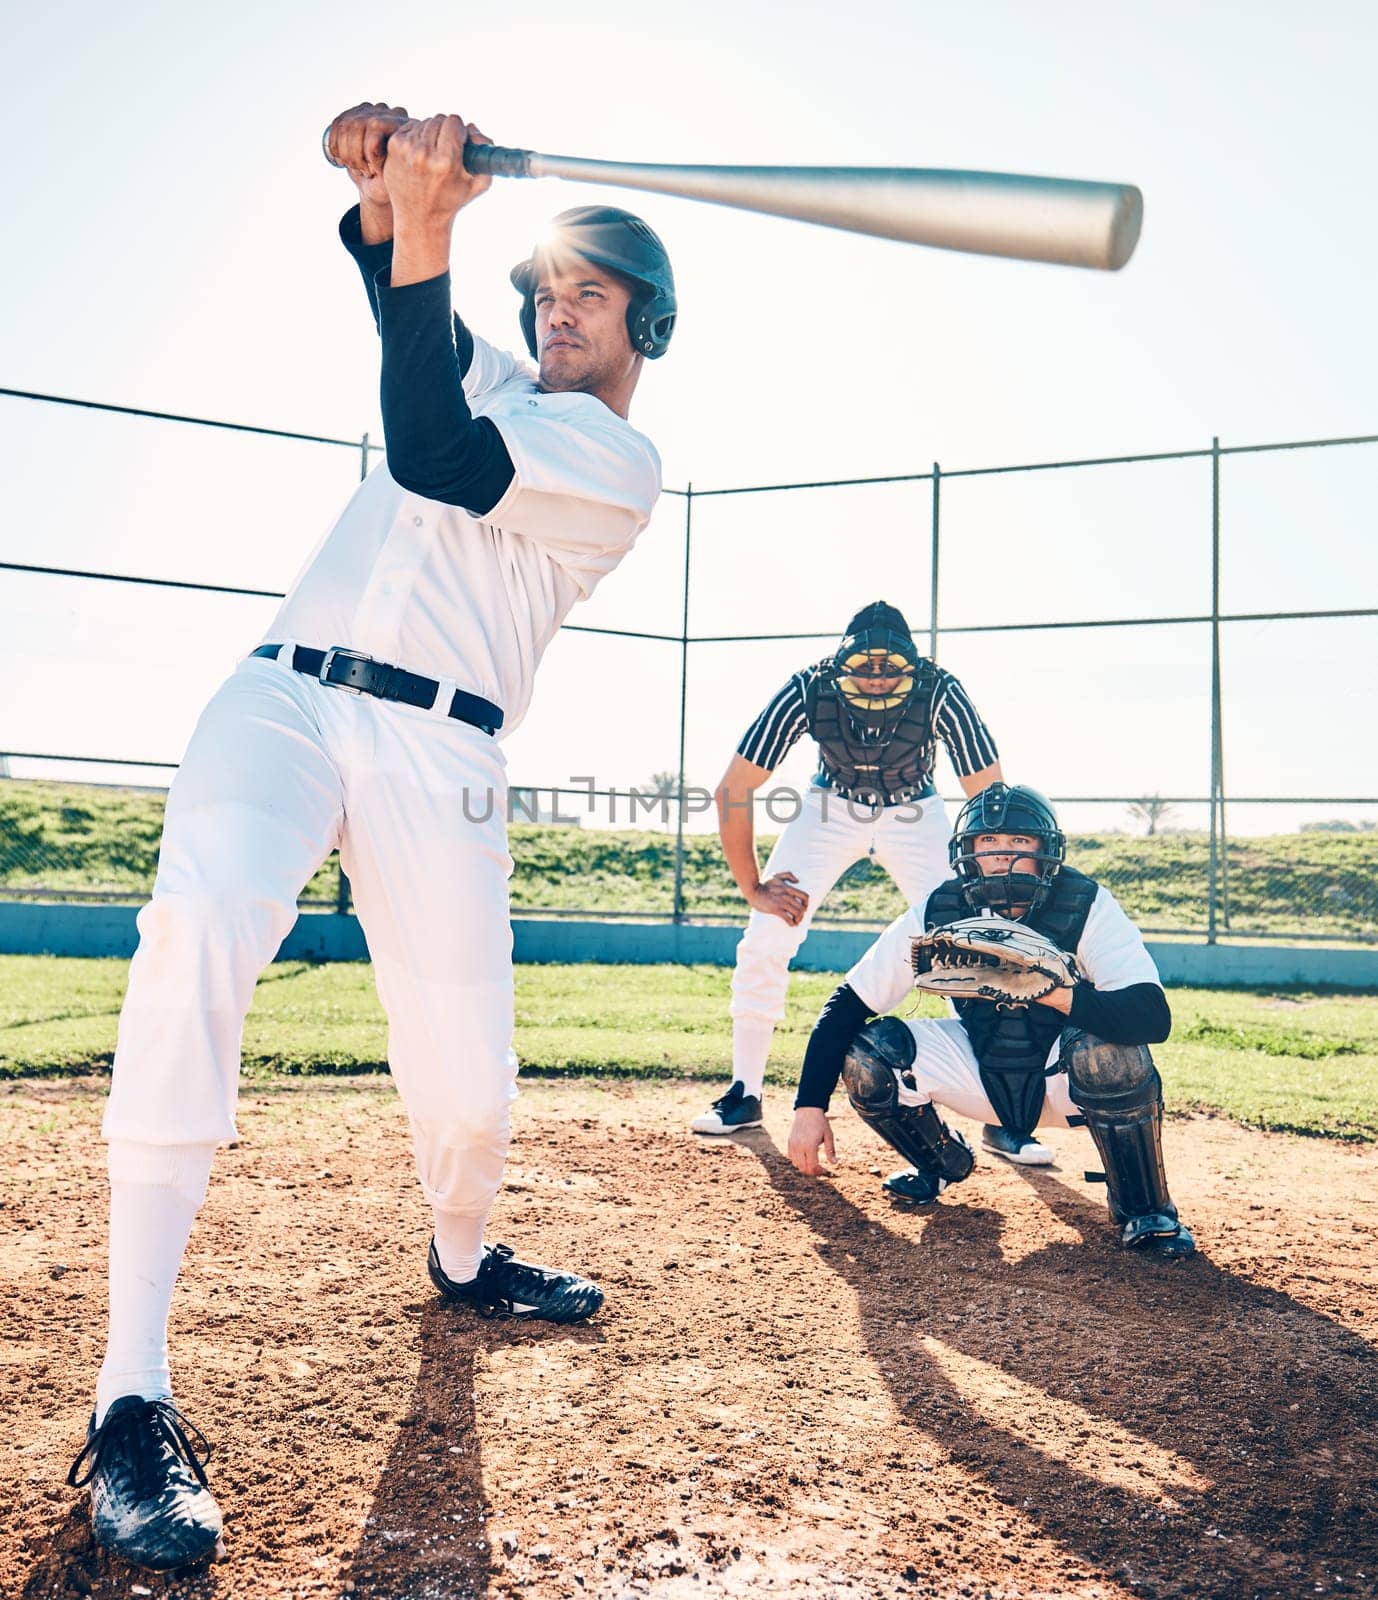 Sports, baseball and team with in action on field ready for playing game, practice and competition. Fitness, motivation and male athletes outdoors for exercise, training and workout for sport match.